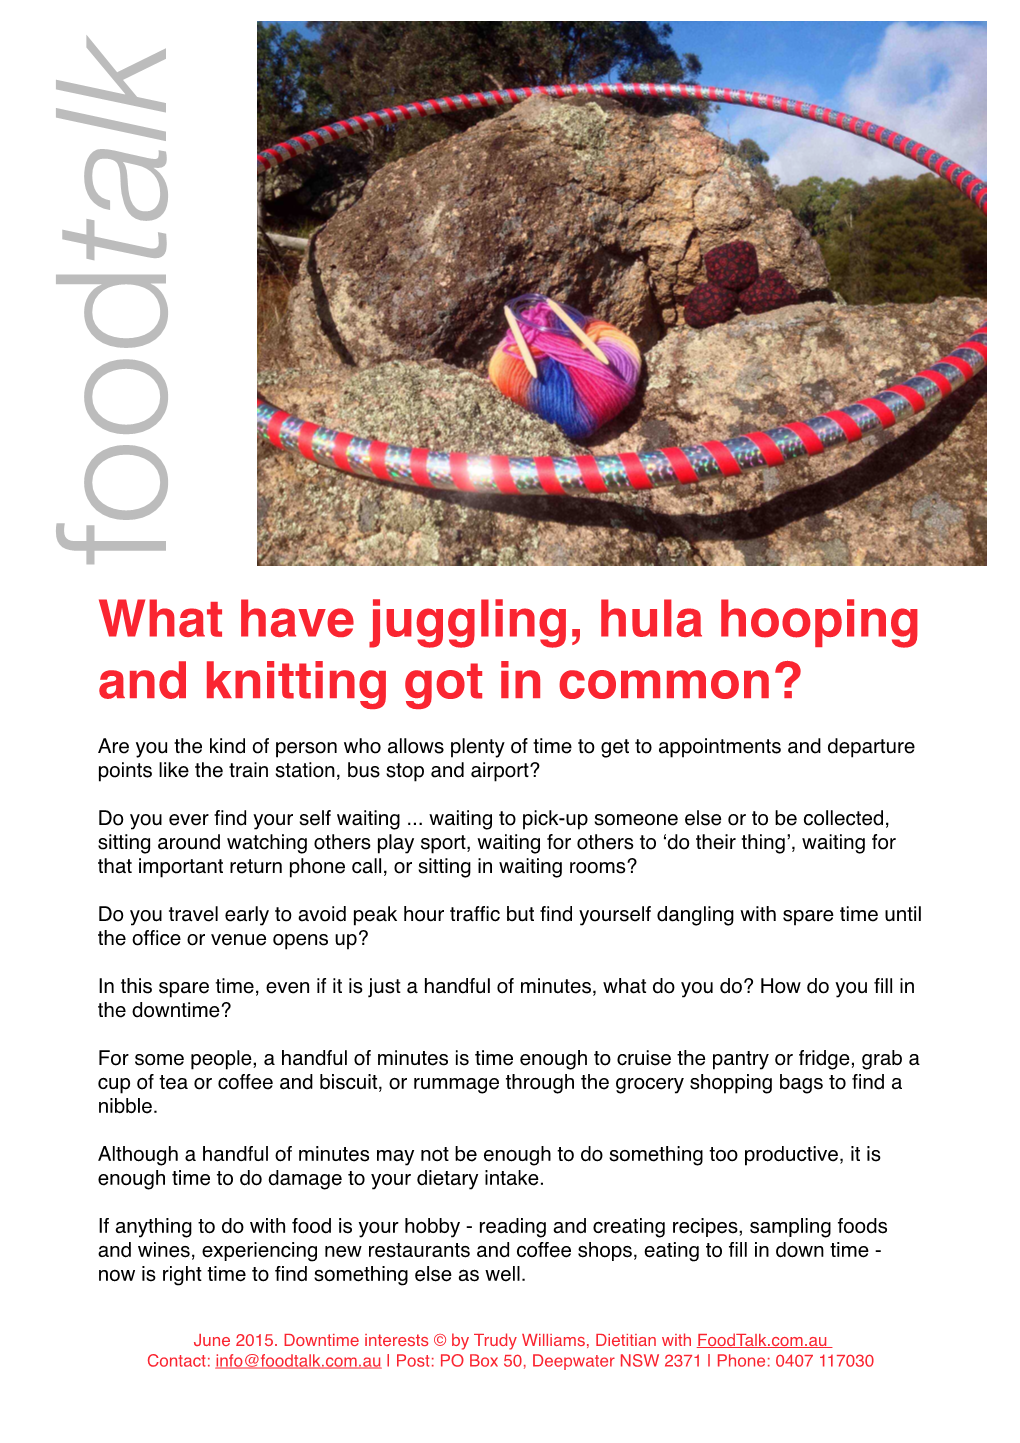 What Have Juggling, Hula Hooping and Knitting Got in Common June 2015